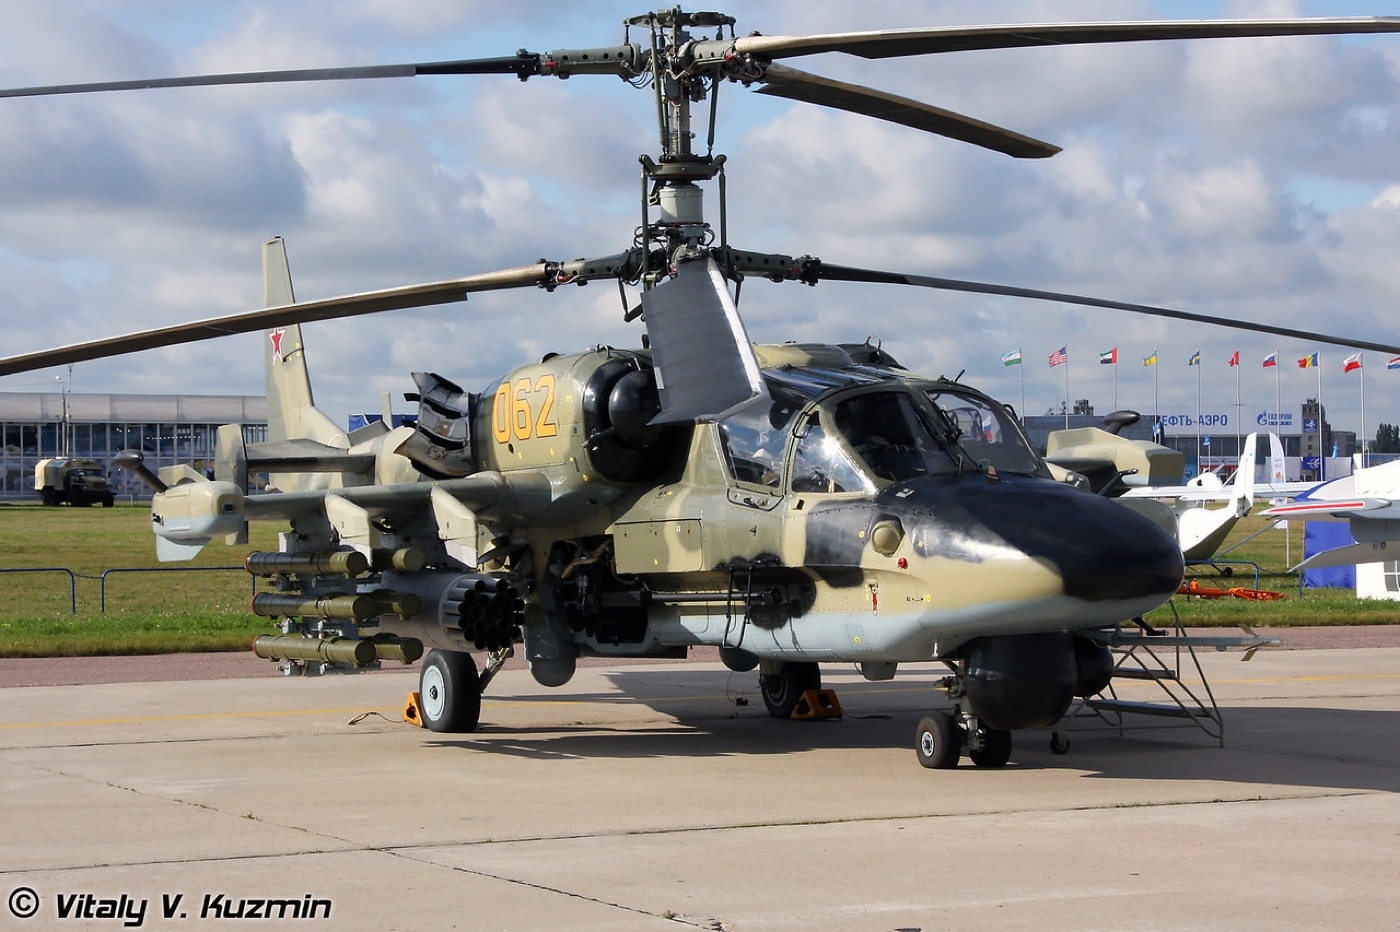 Ka-52 with full weapons compliment on display